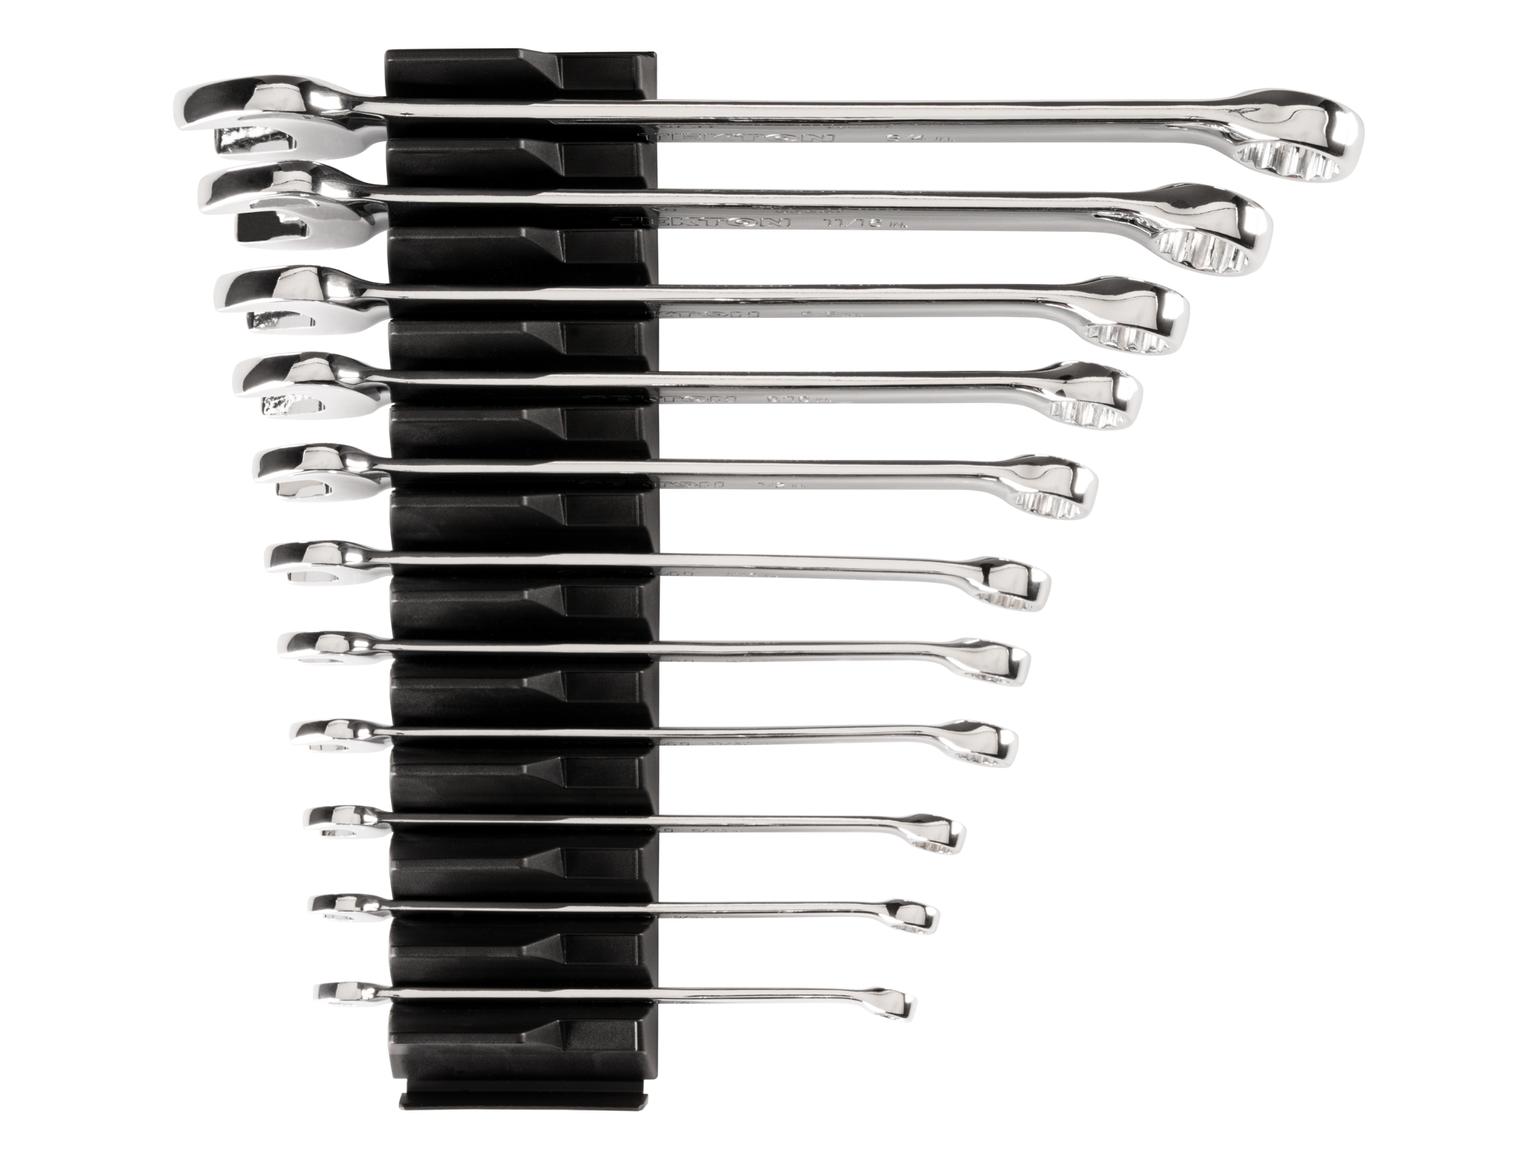 TEKTON WCB95101-T Combination Wrench Set with Modular Slotted Organizer, 11-Piece (1/4 - 3/4 in.)